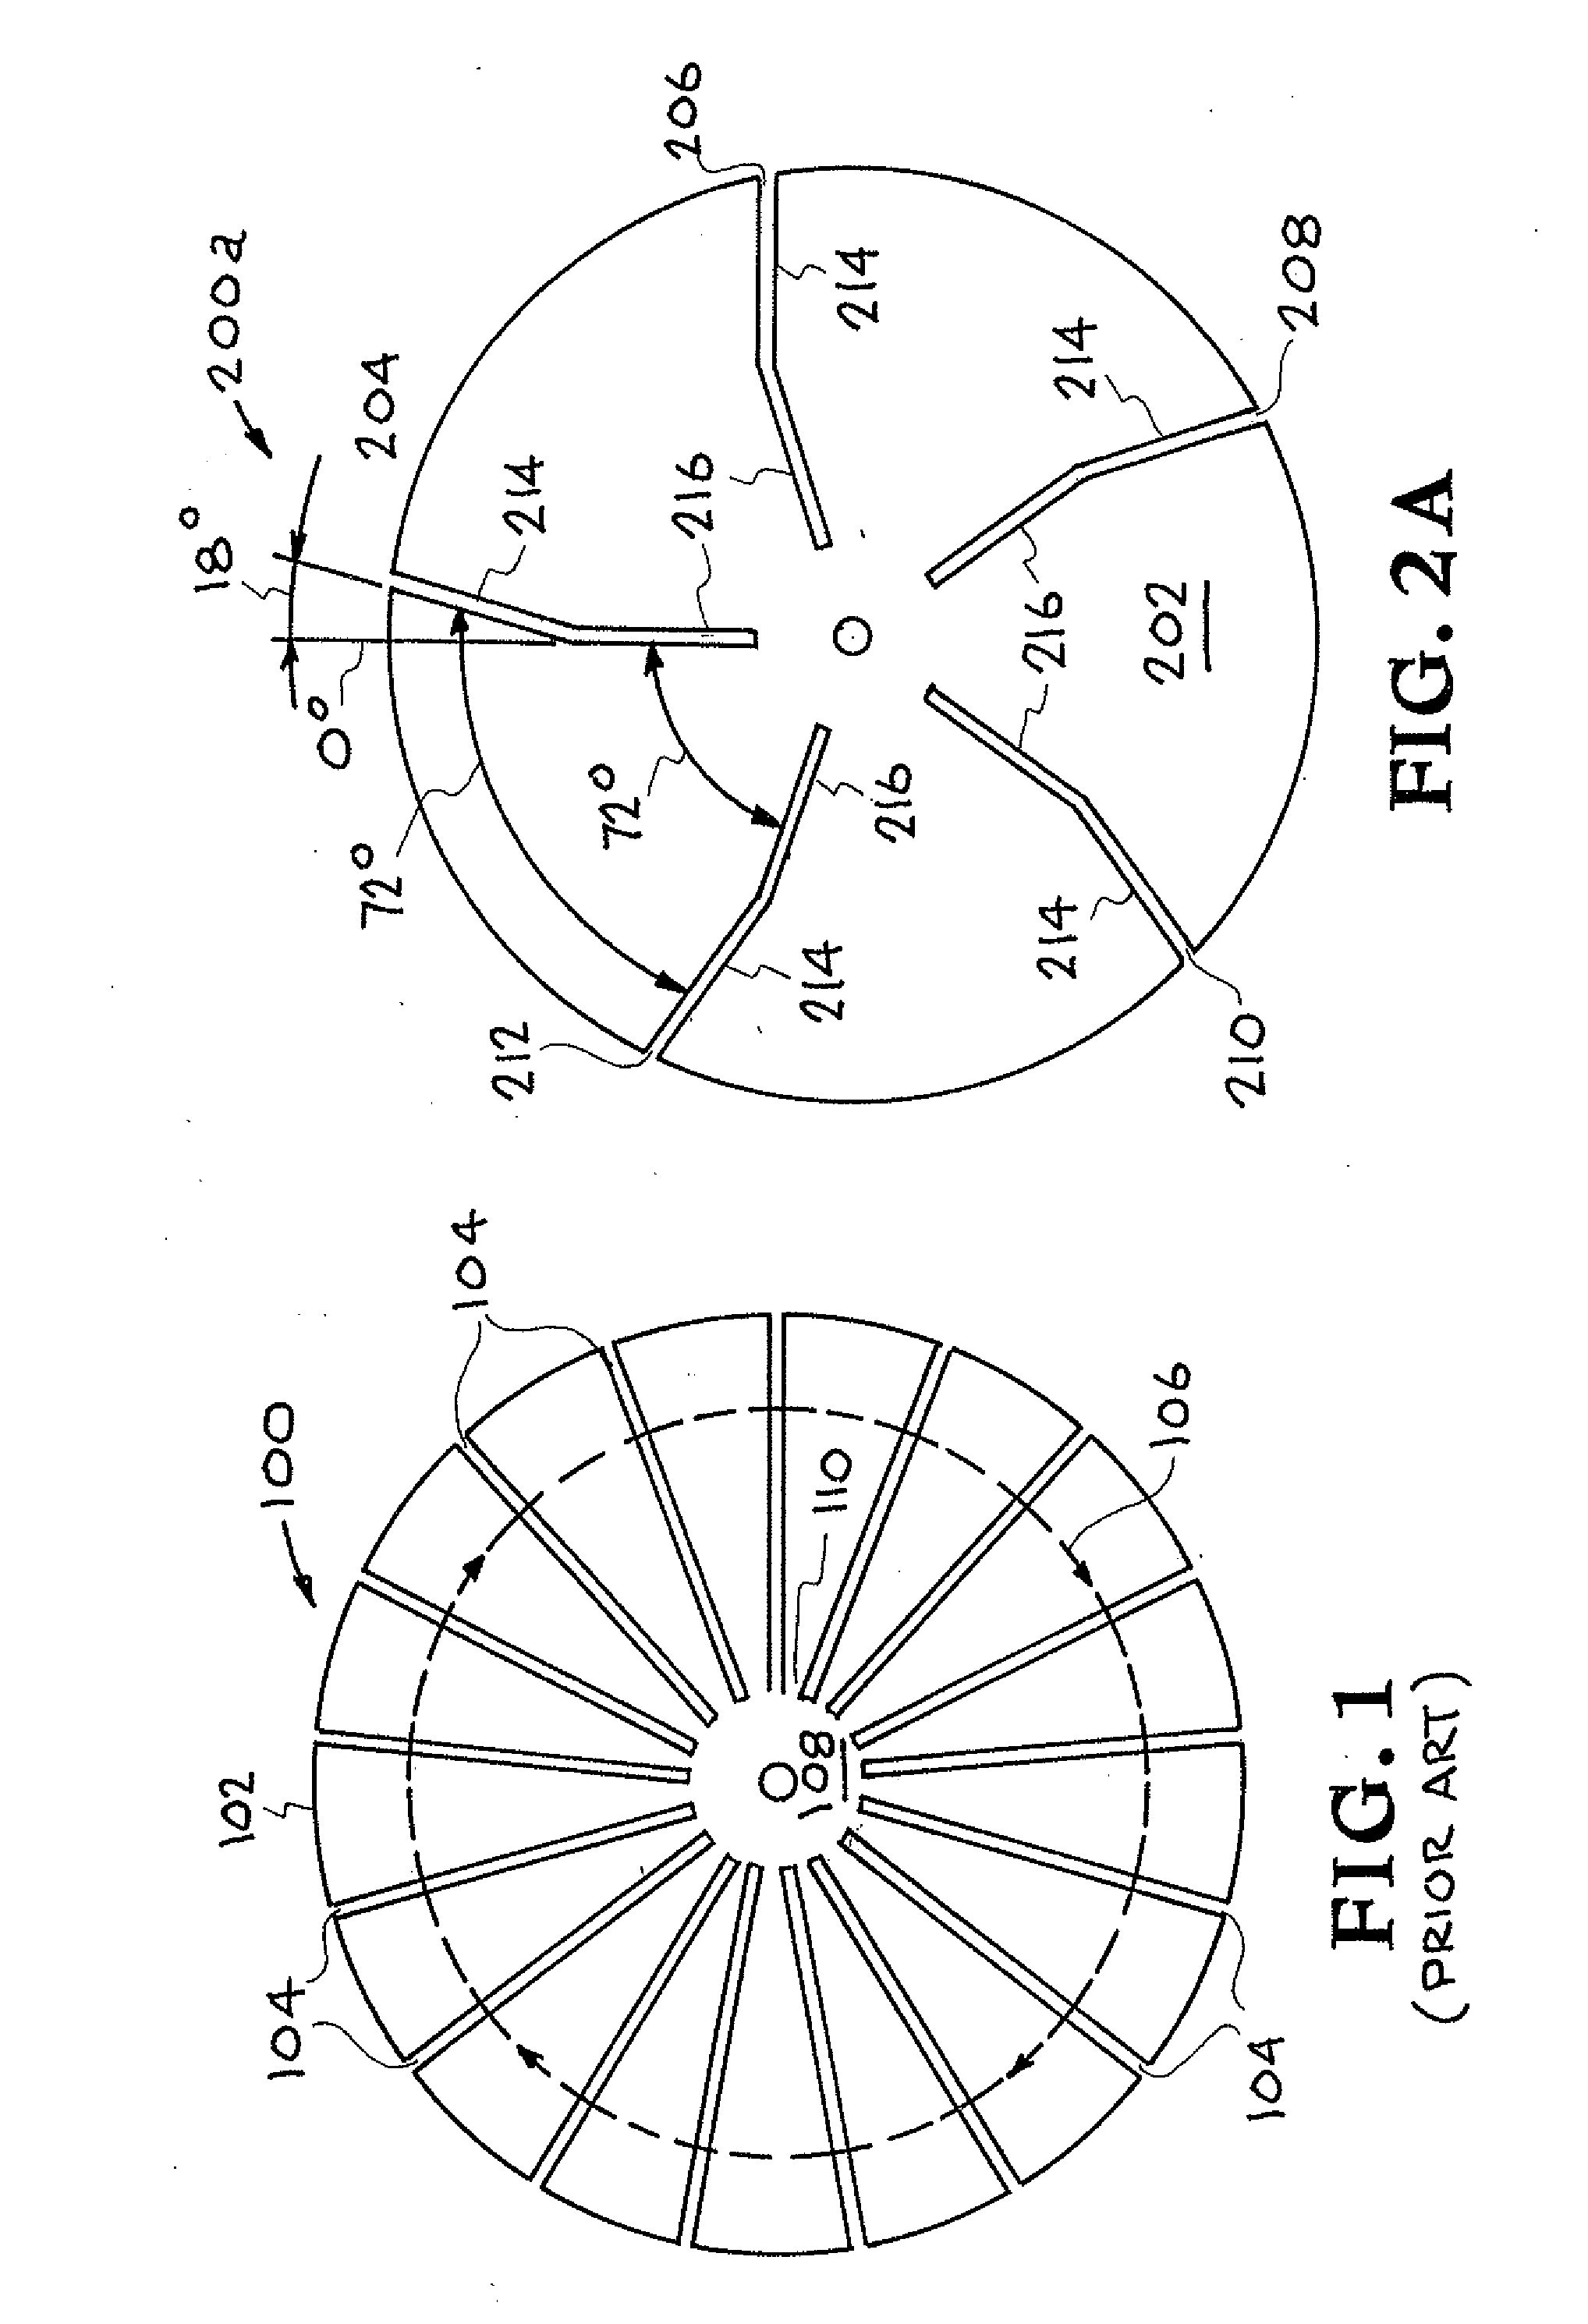 Slit Disk for Modified Faraday Cup Diagnostic for Determing Power Density of Electron and Ion Beams